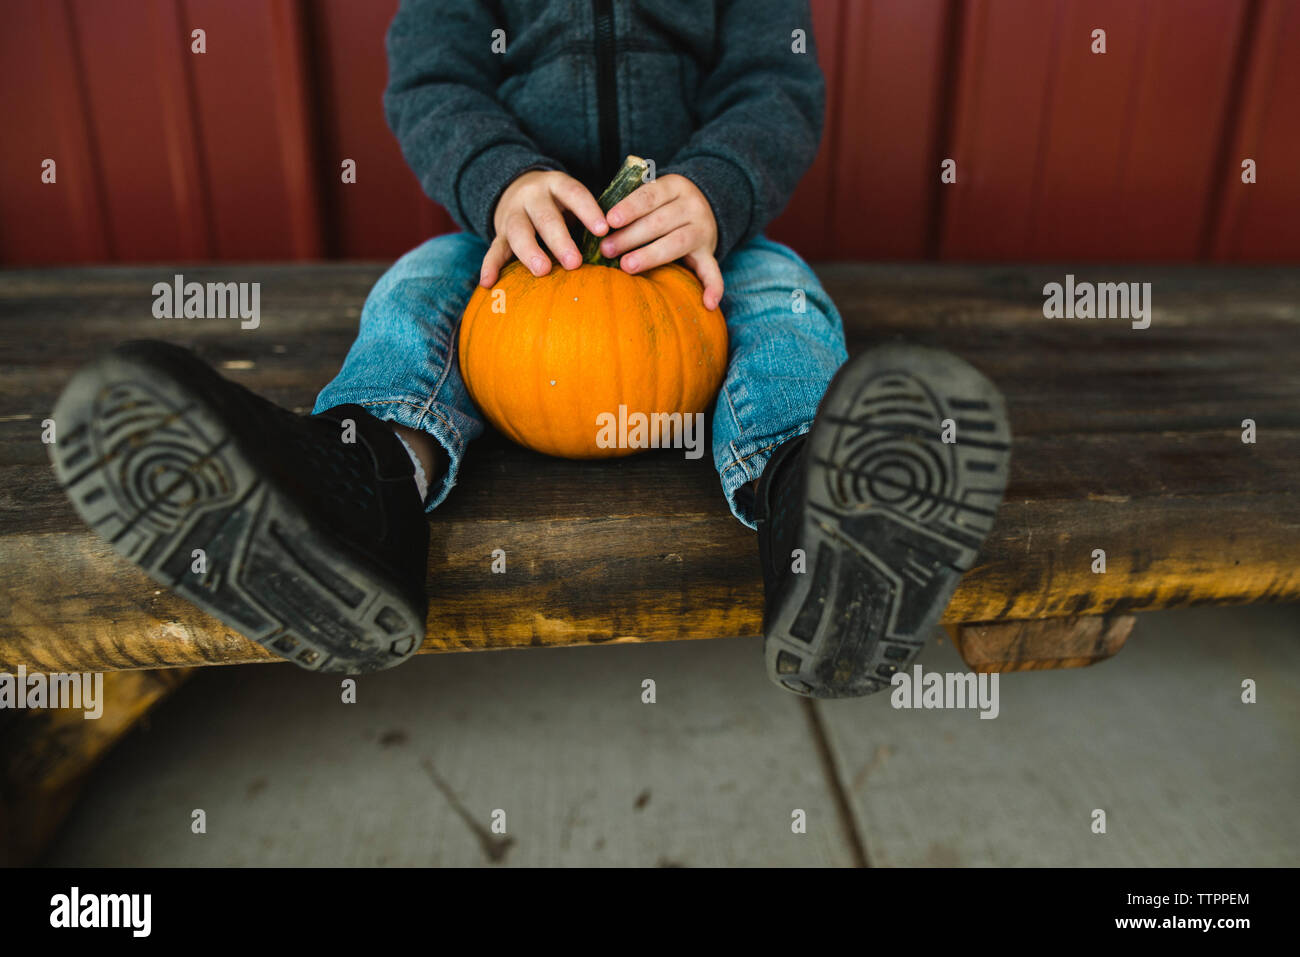 Low section of boy holding pumpkin while sitting on wooden bench Stock Photo